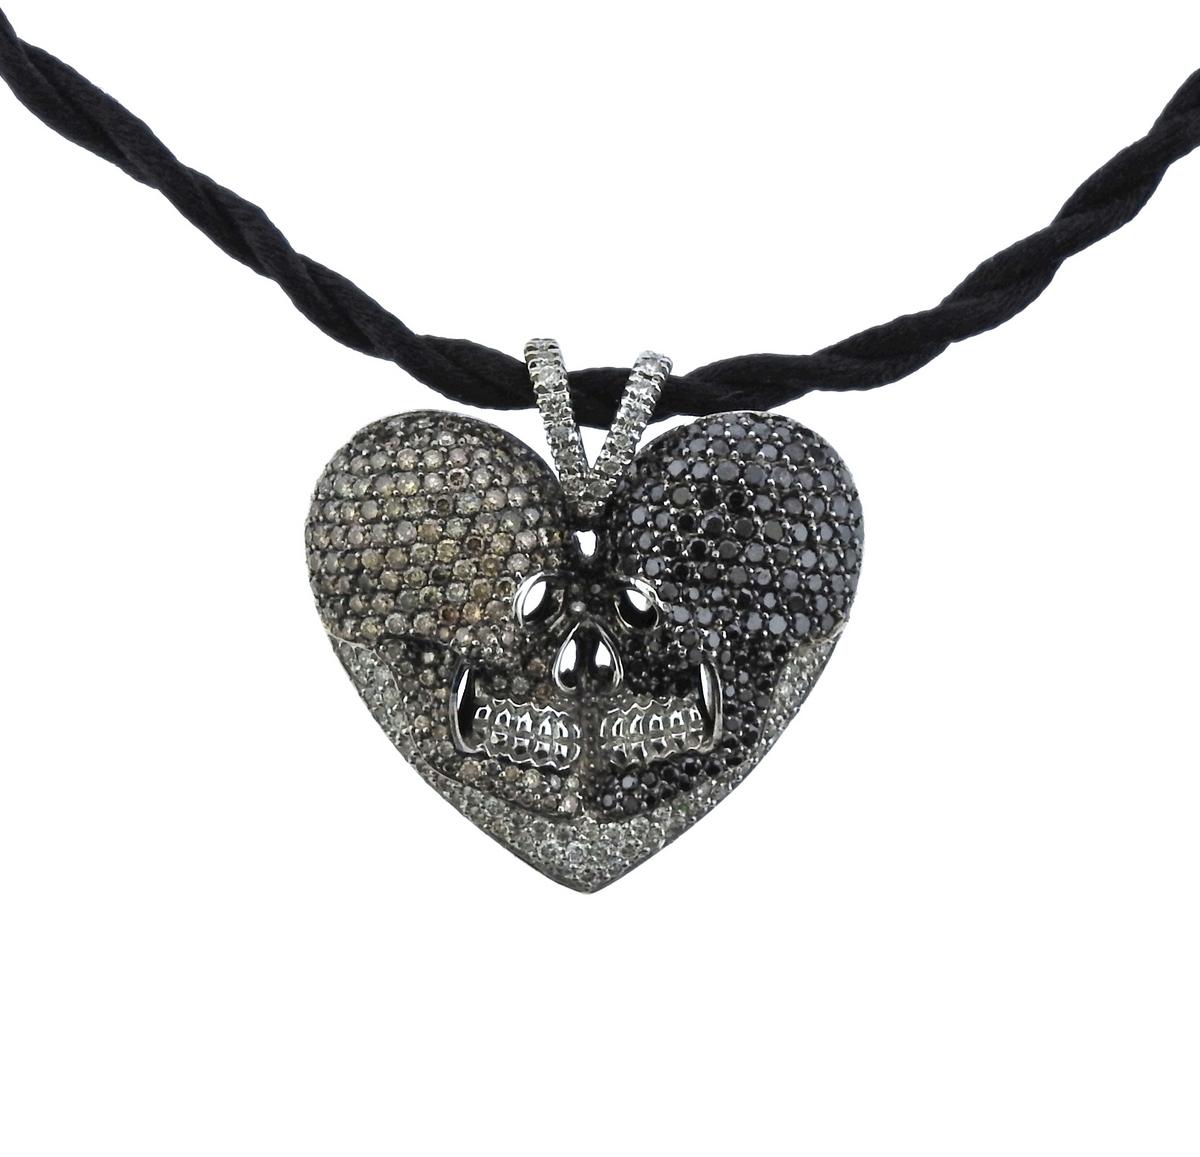 Alp Sagnak 18k gold heart pendant, set with black sapphires and approx. 1.70ctw in white and fancy brown diamonds. Suspended on a black cord necklace. Necklace is 18.25